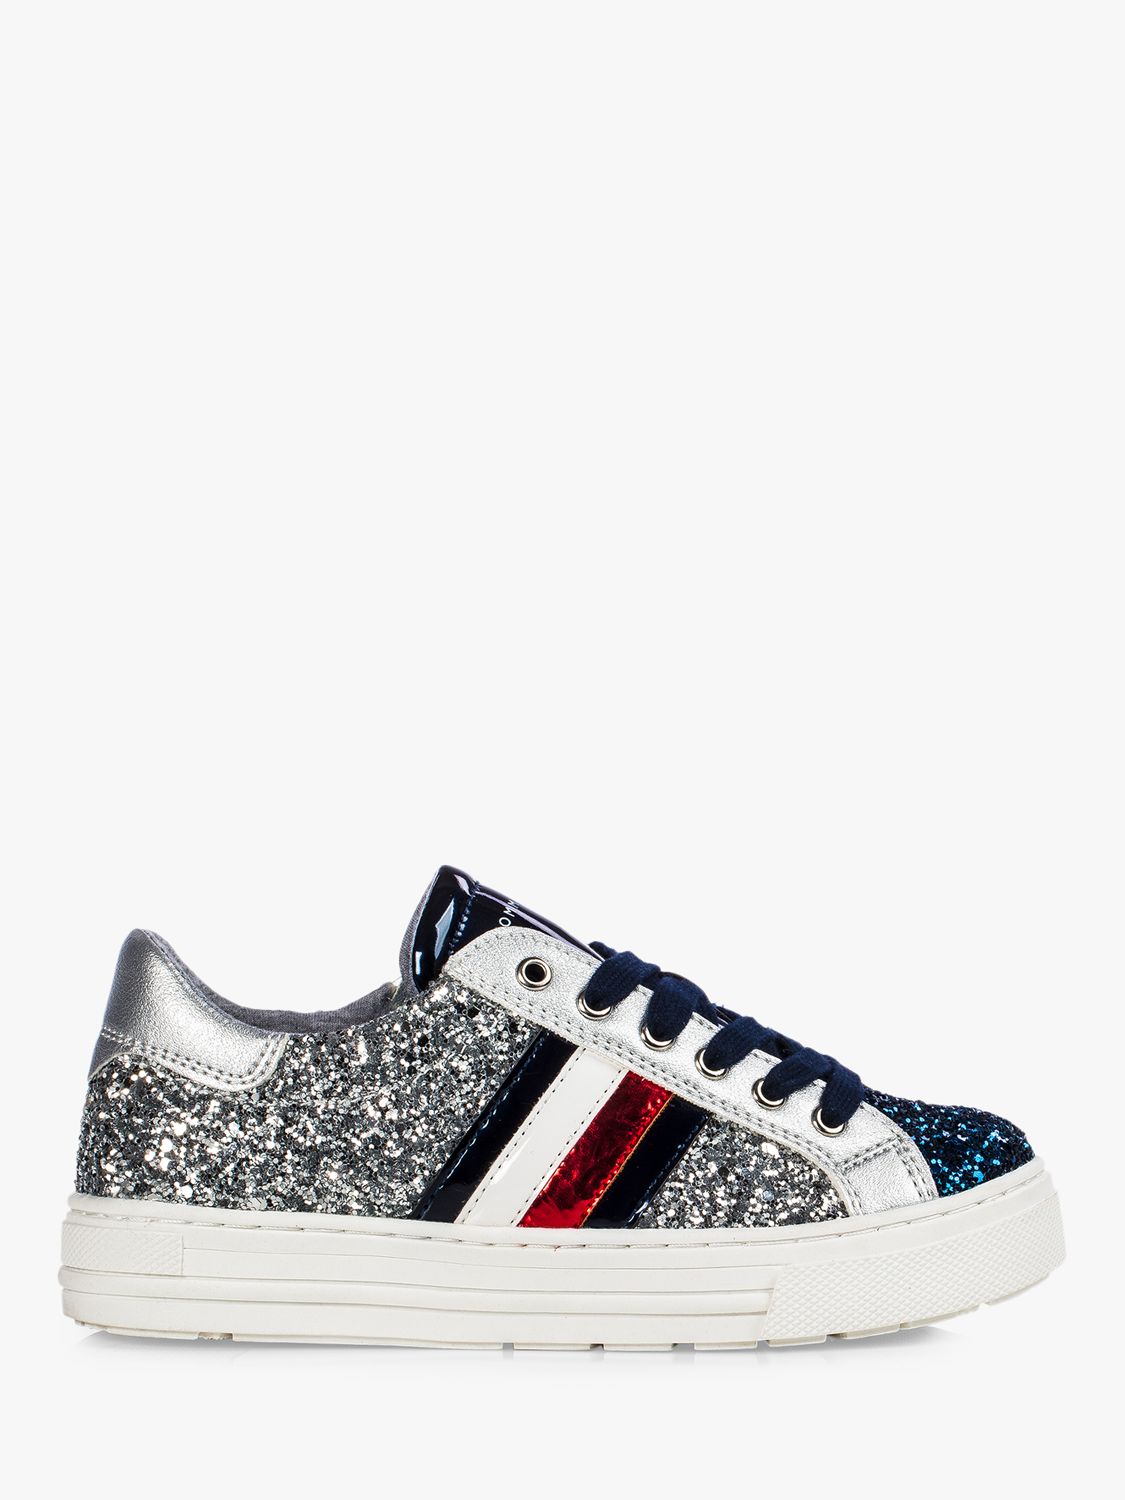 sparkly tommy hilfiger shoes